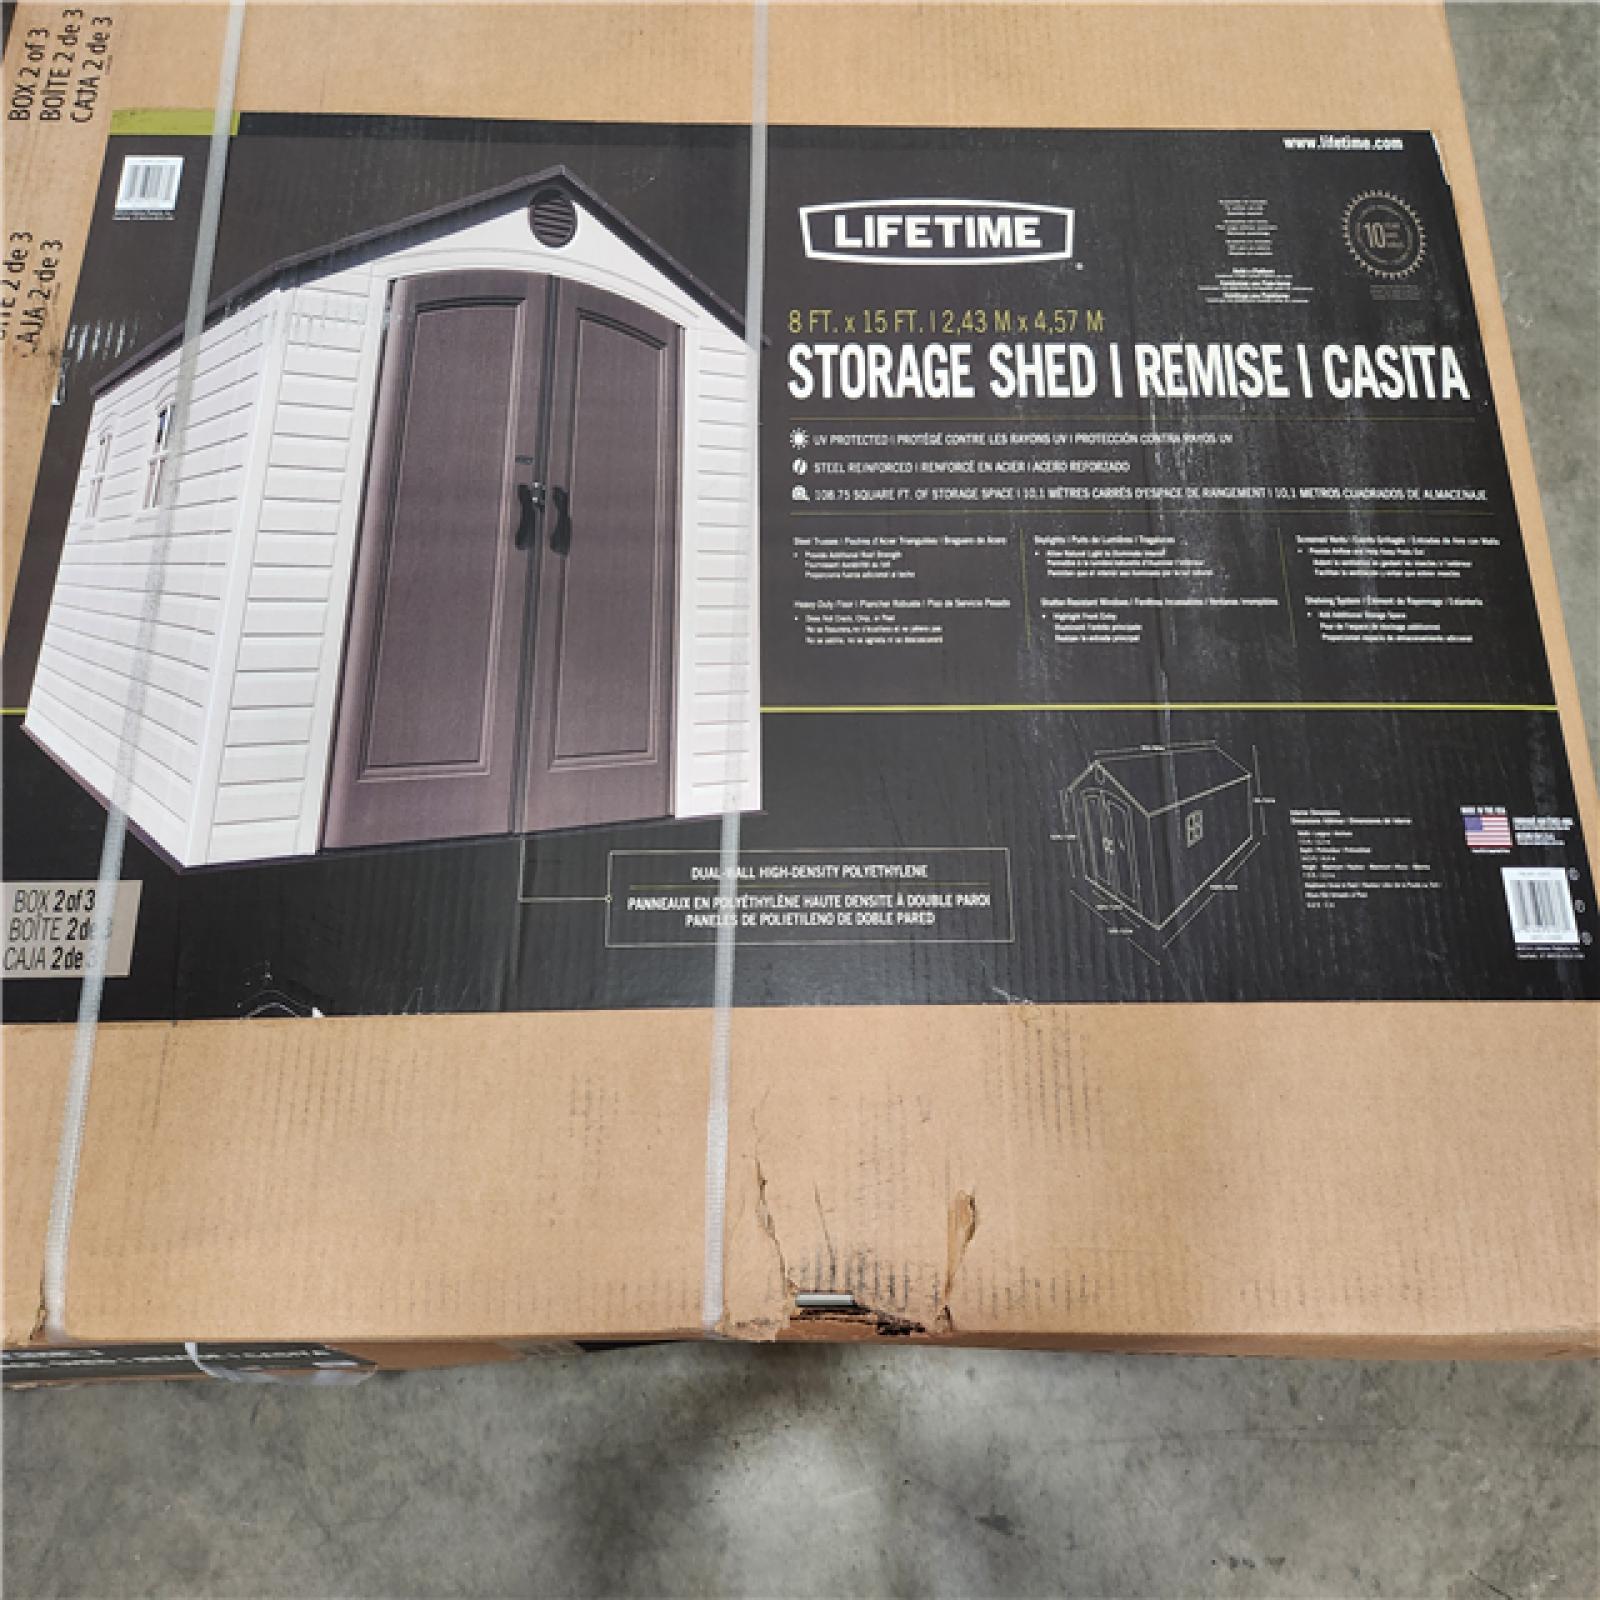 Phoenix Location NEW Lifetime 8 ft. x 15 ft. Resin Storage Shed Model 60075